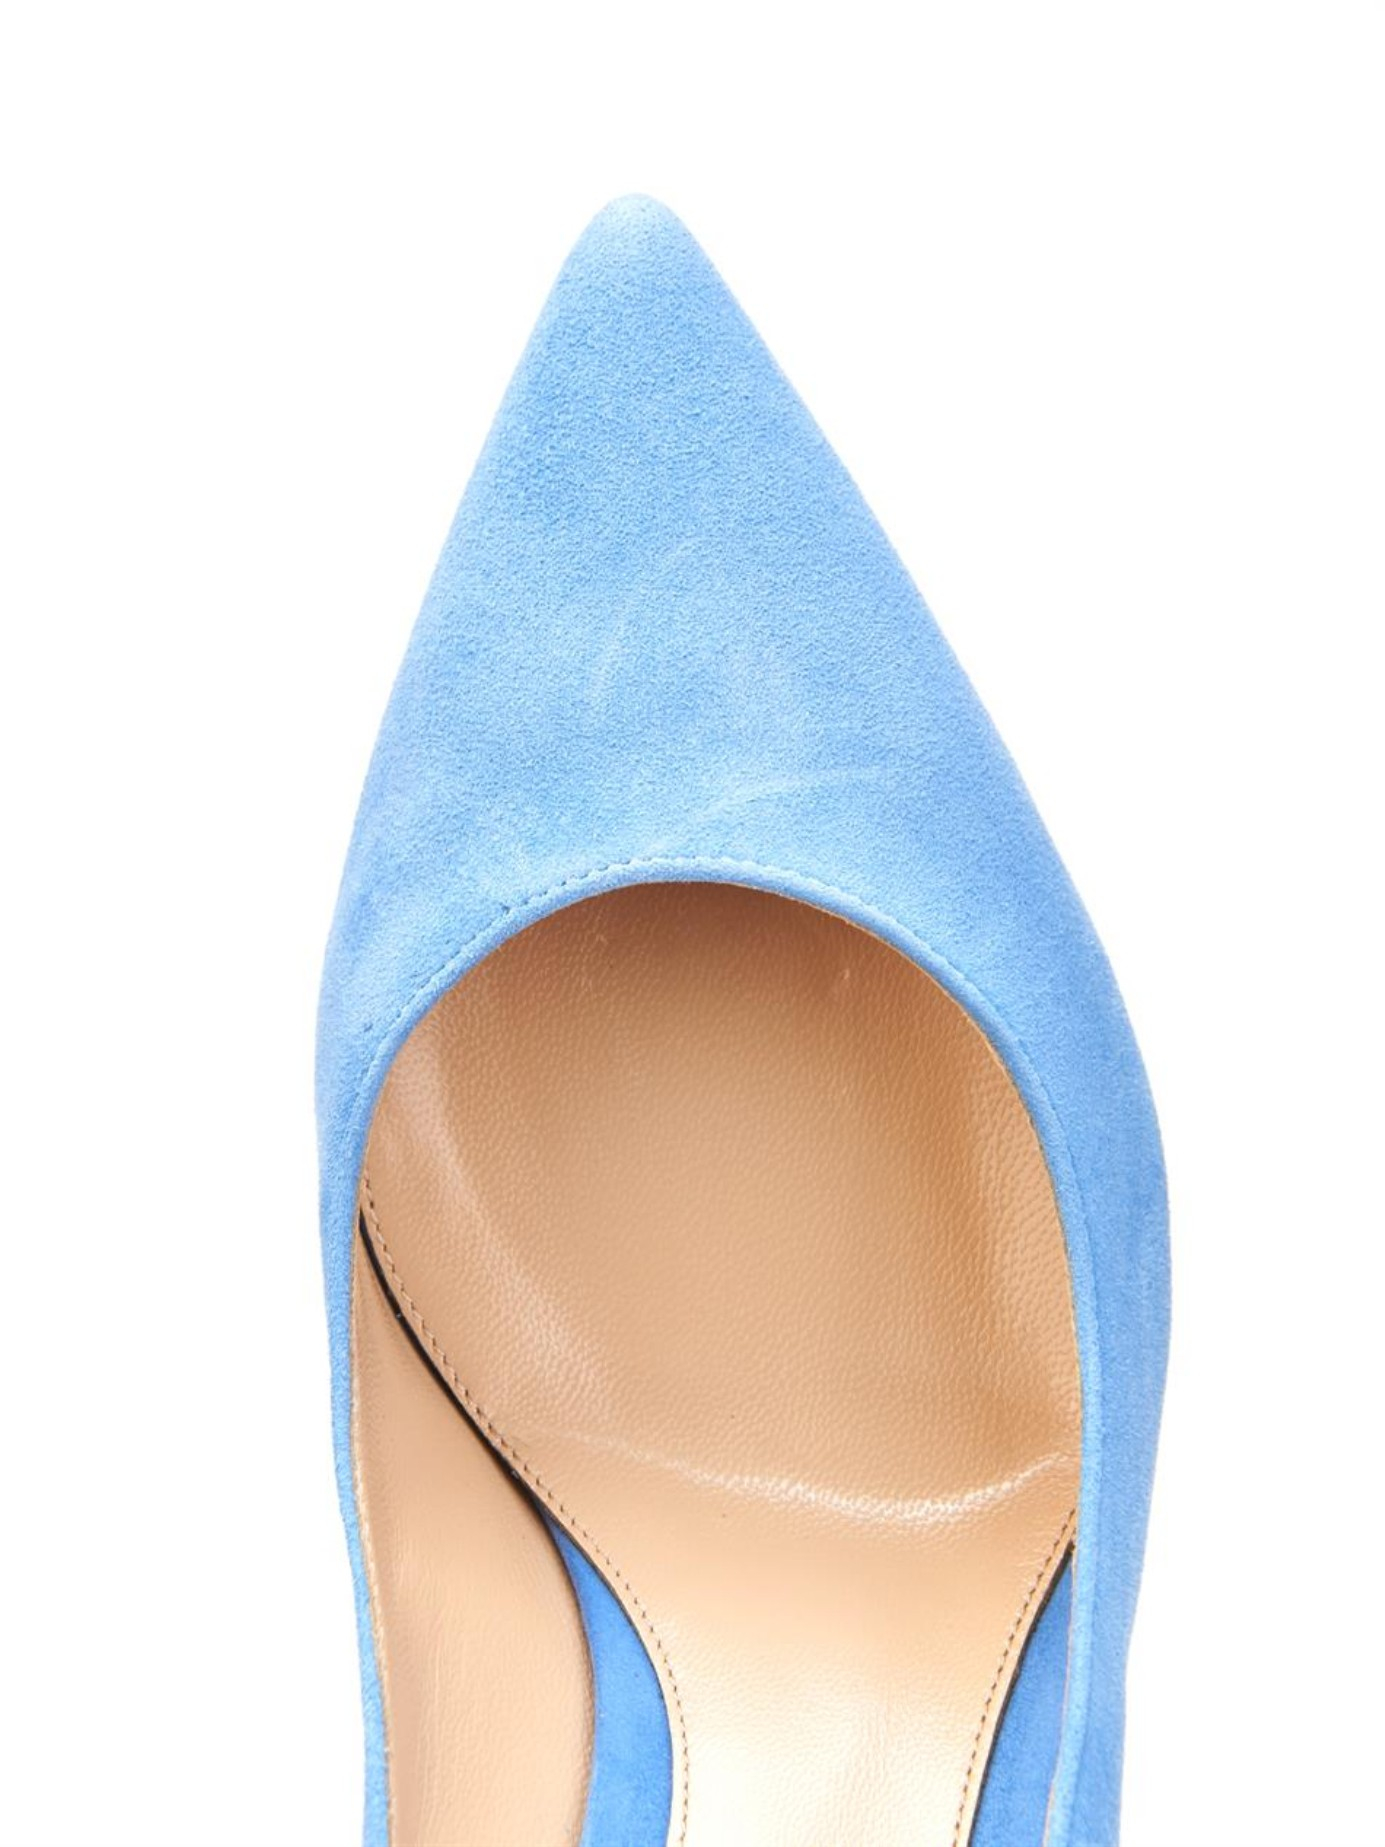 Gianvito Rossi Business Point-Toe Suede Pumps in Light Blue (Blue) - Lyst